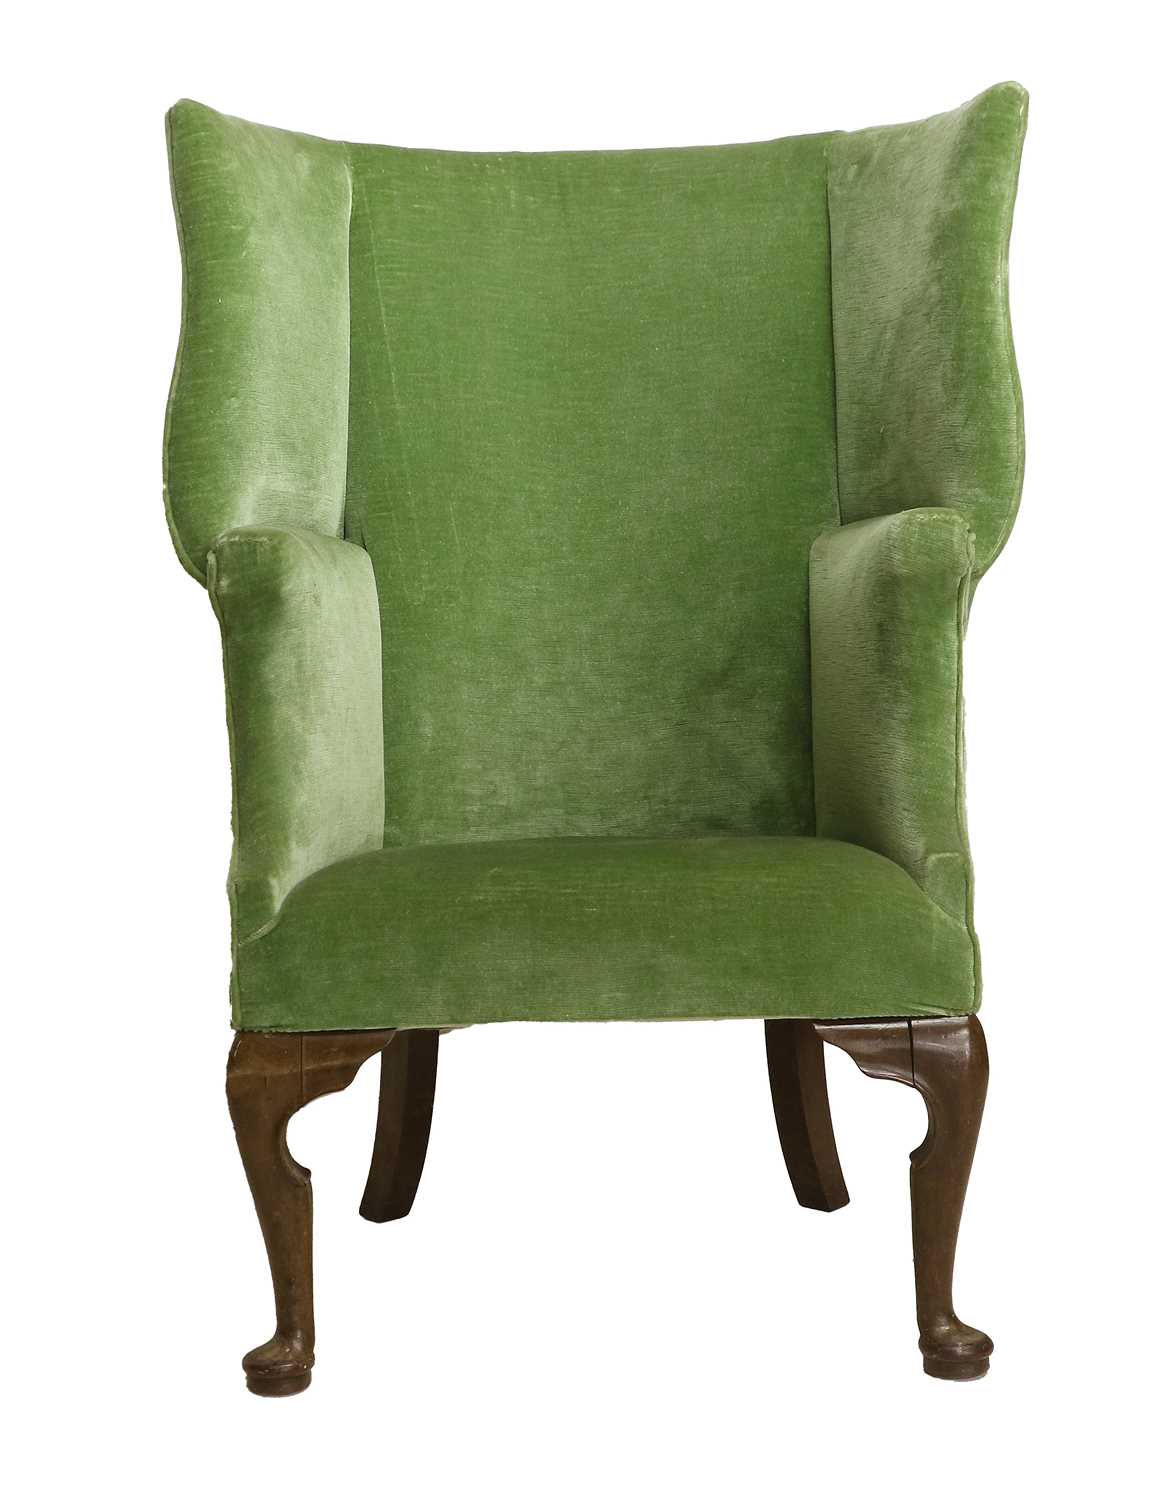 A George III-Style Barrel-Shaped Armchair, 19th century, covered in green velvet, with overstuffed - Image 2 of 7